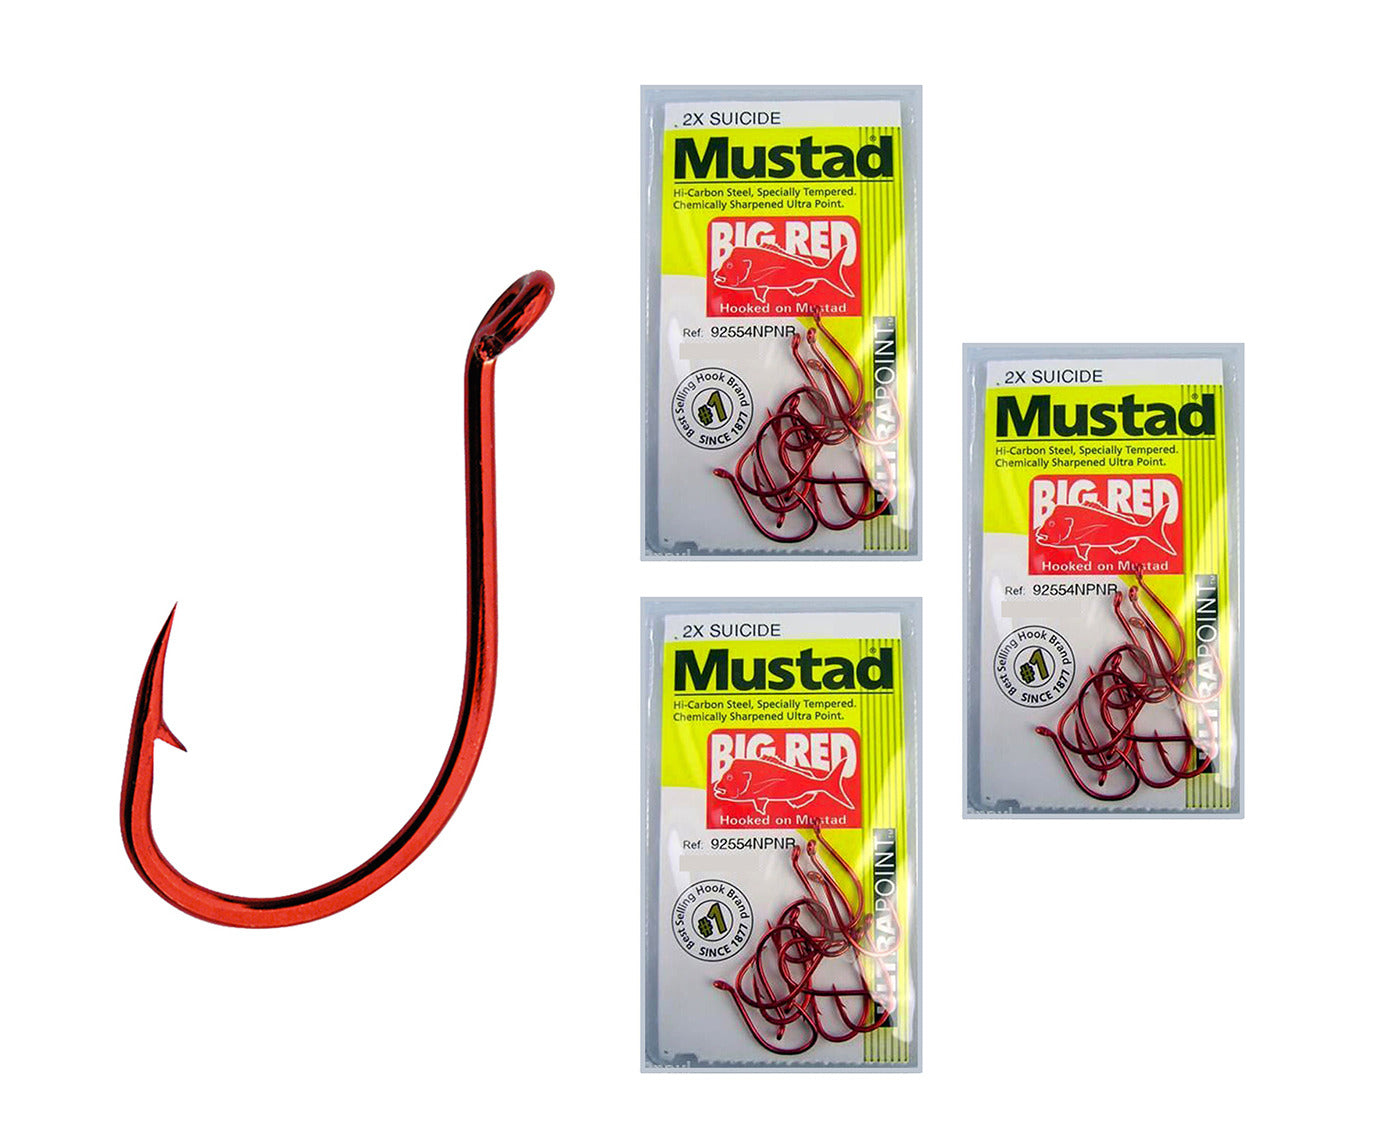 Mustad Big Red Suicide Hooks (Carded)